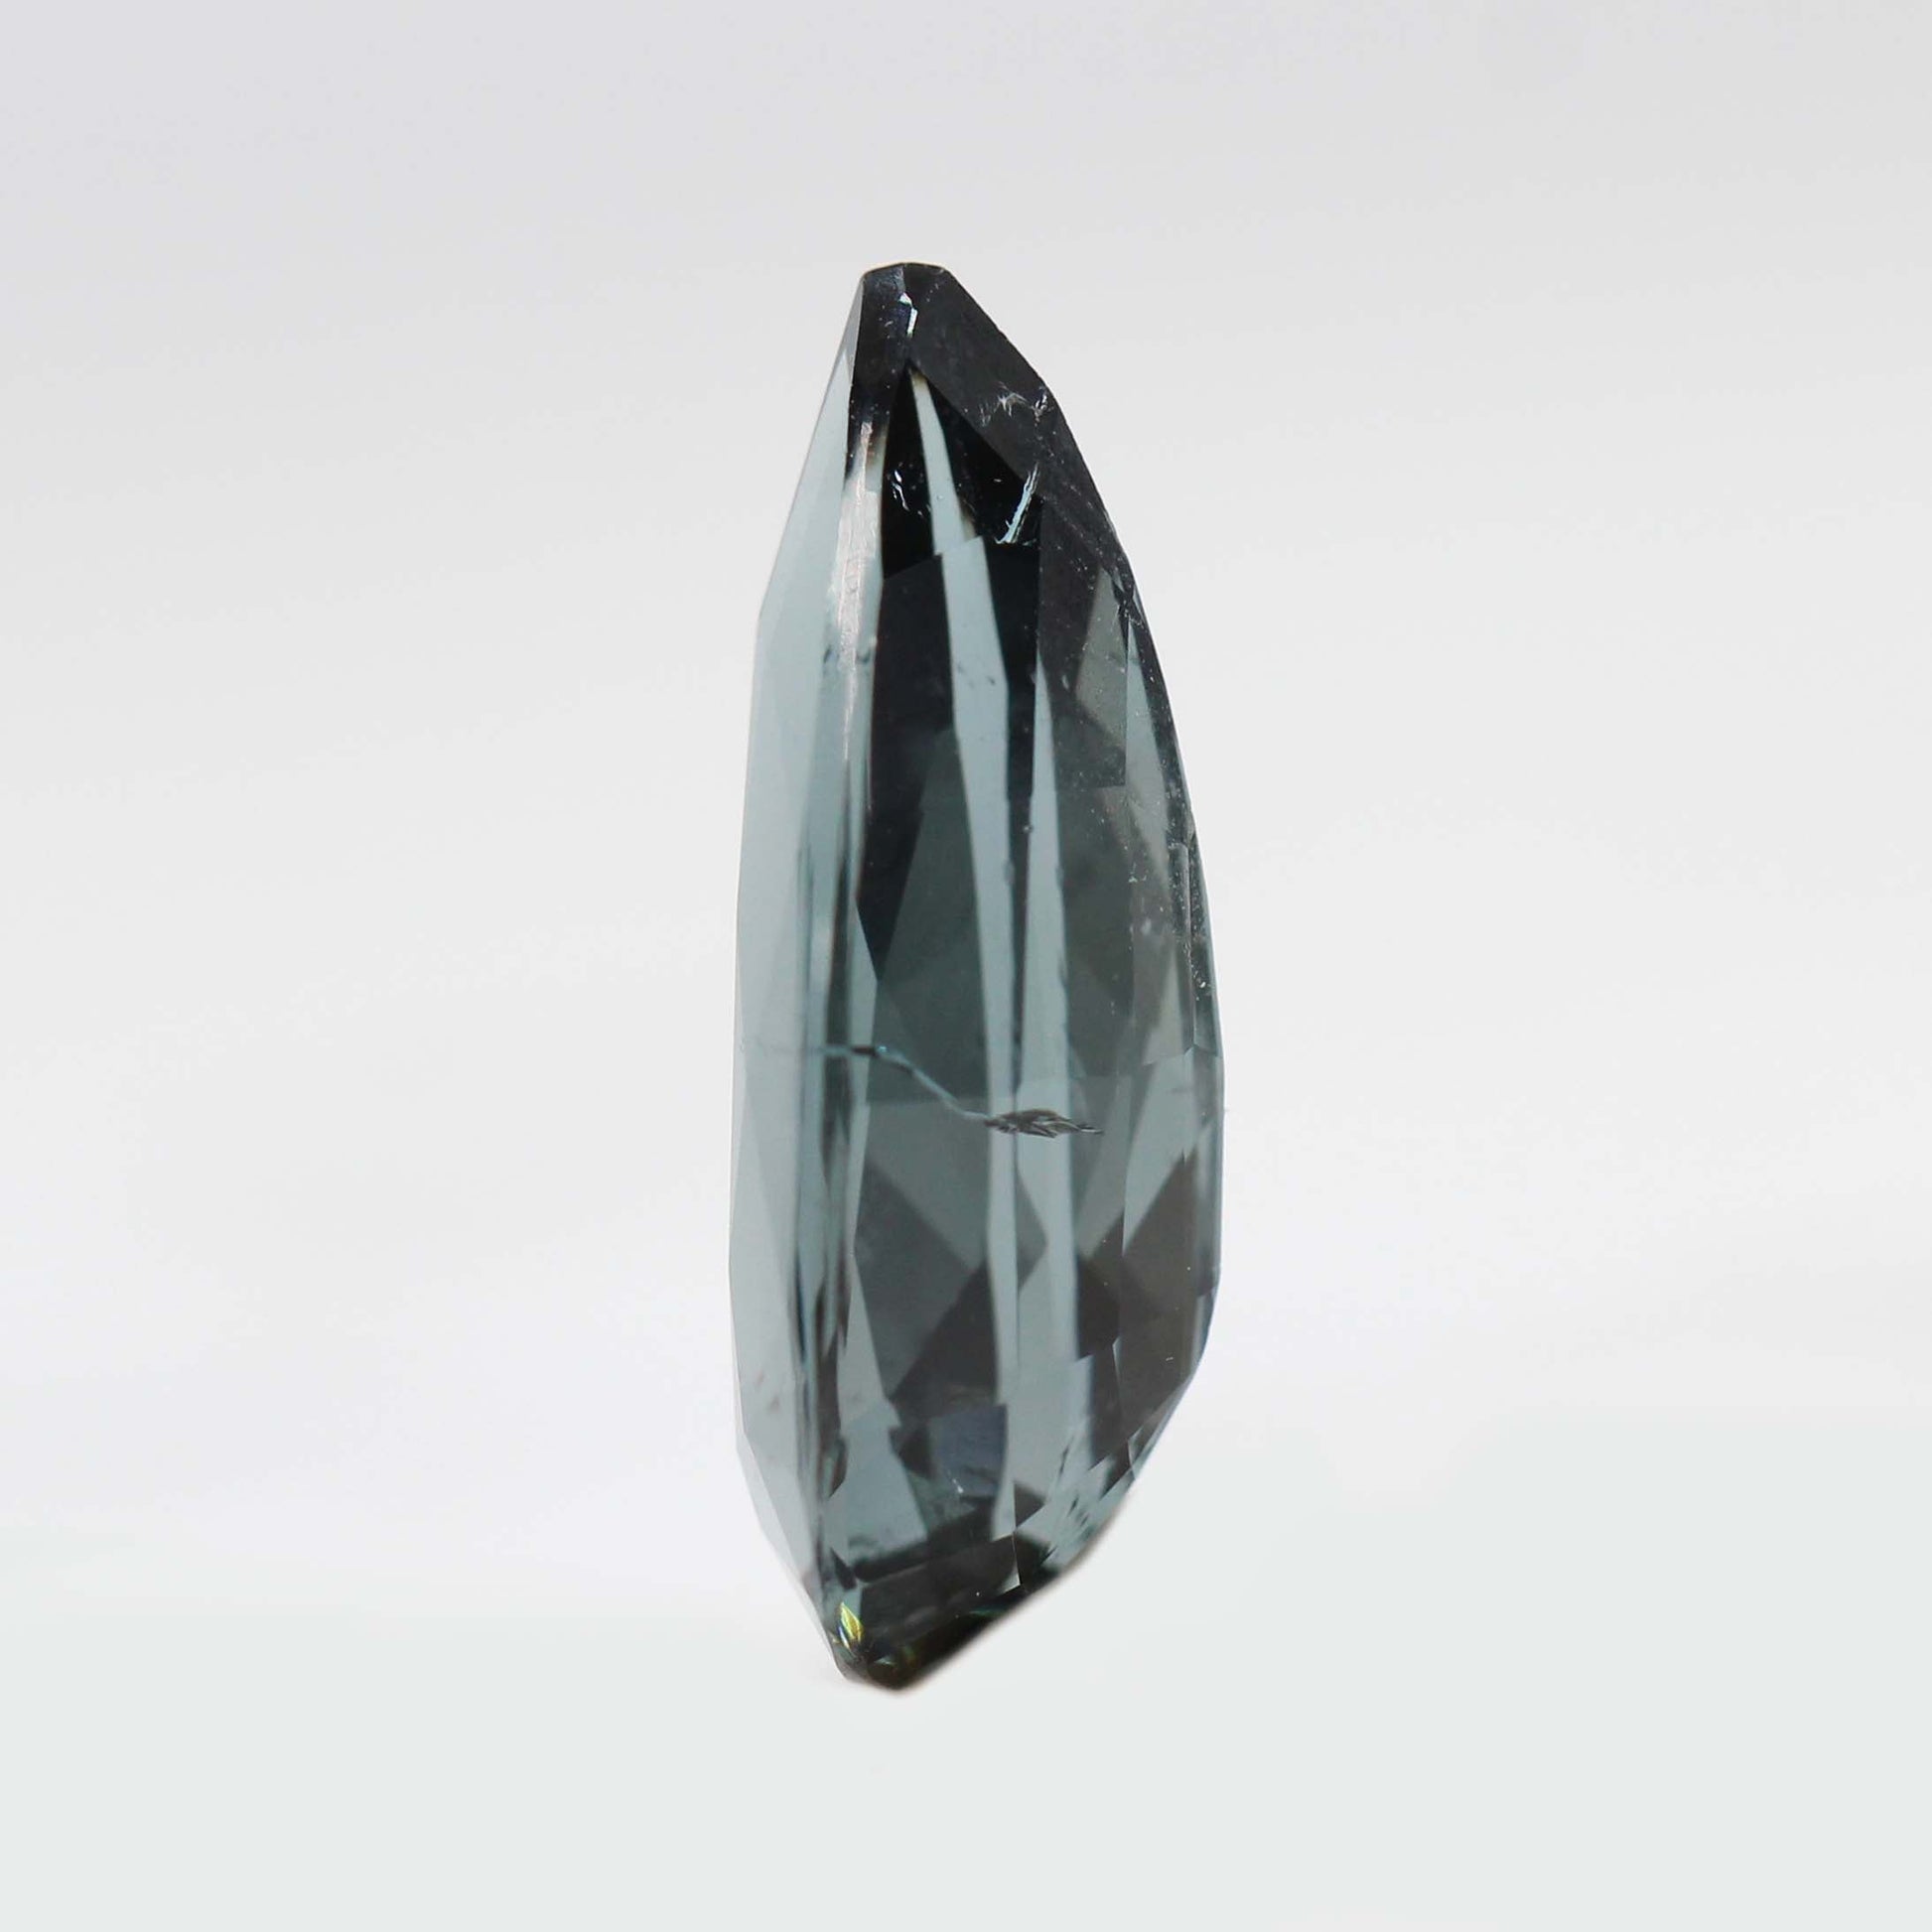 CAELEN (M) 5.02 Carat Blue Pear Tourmaline/Indicolite for Custom Work - Inventory Code IBP502 - Midwinter Co. Alternative Bridal Rings and Modern Fine Jewelry